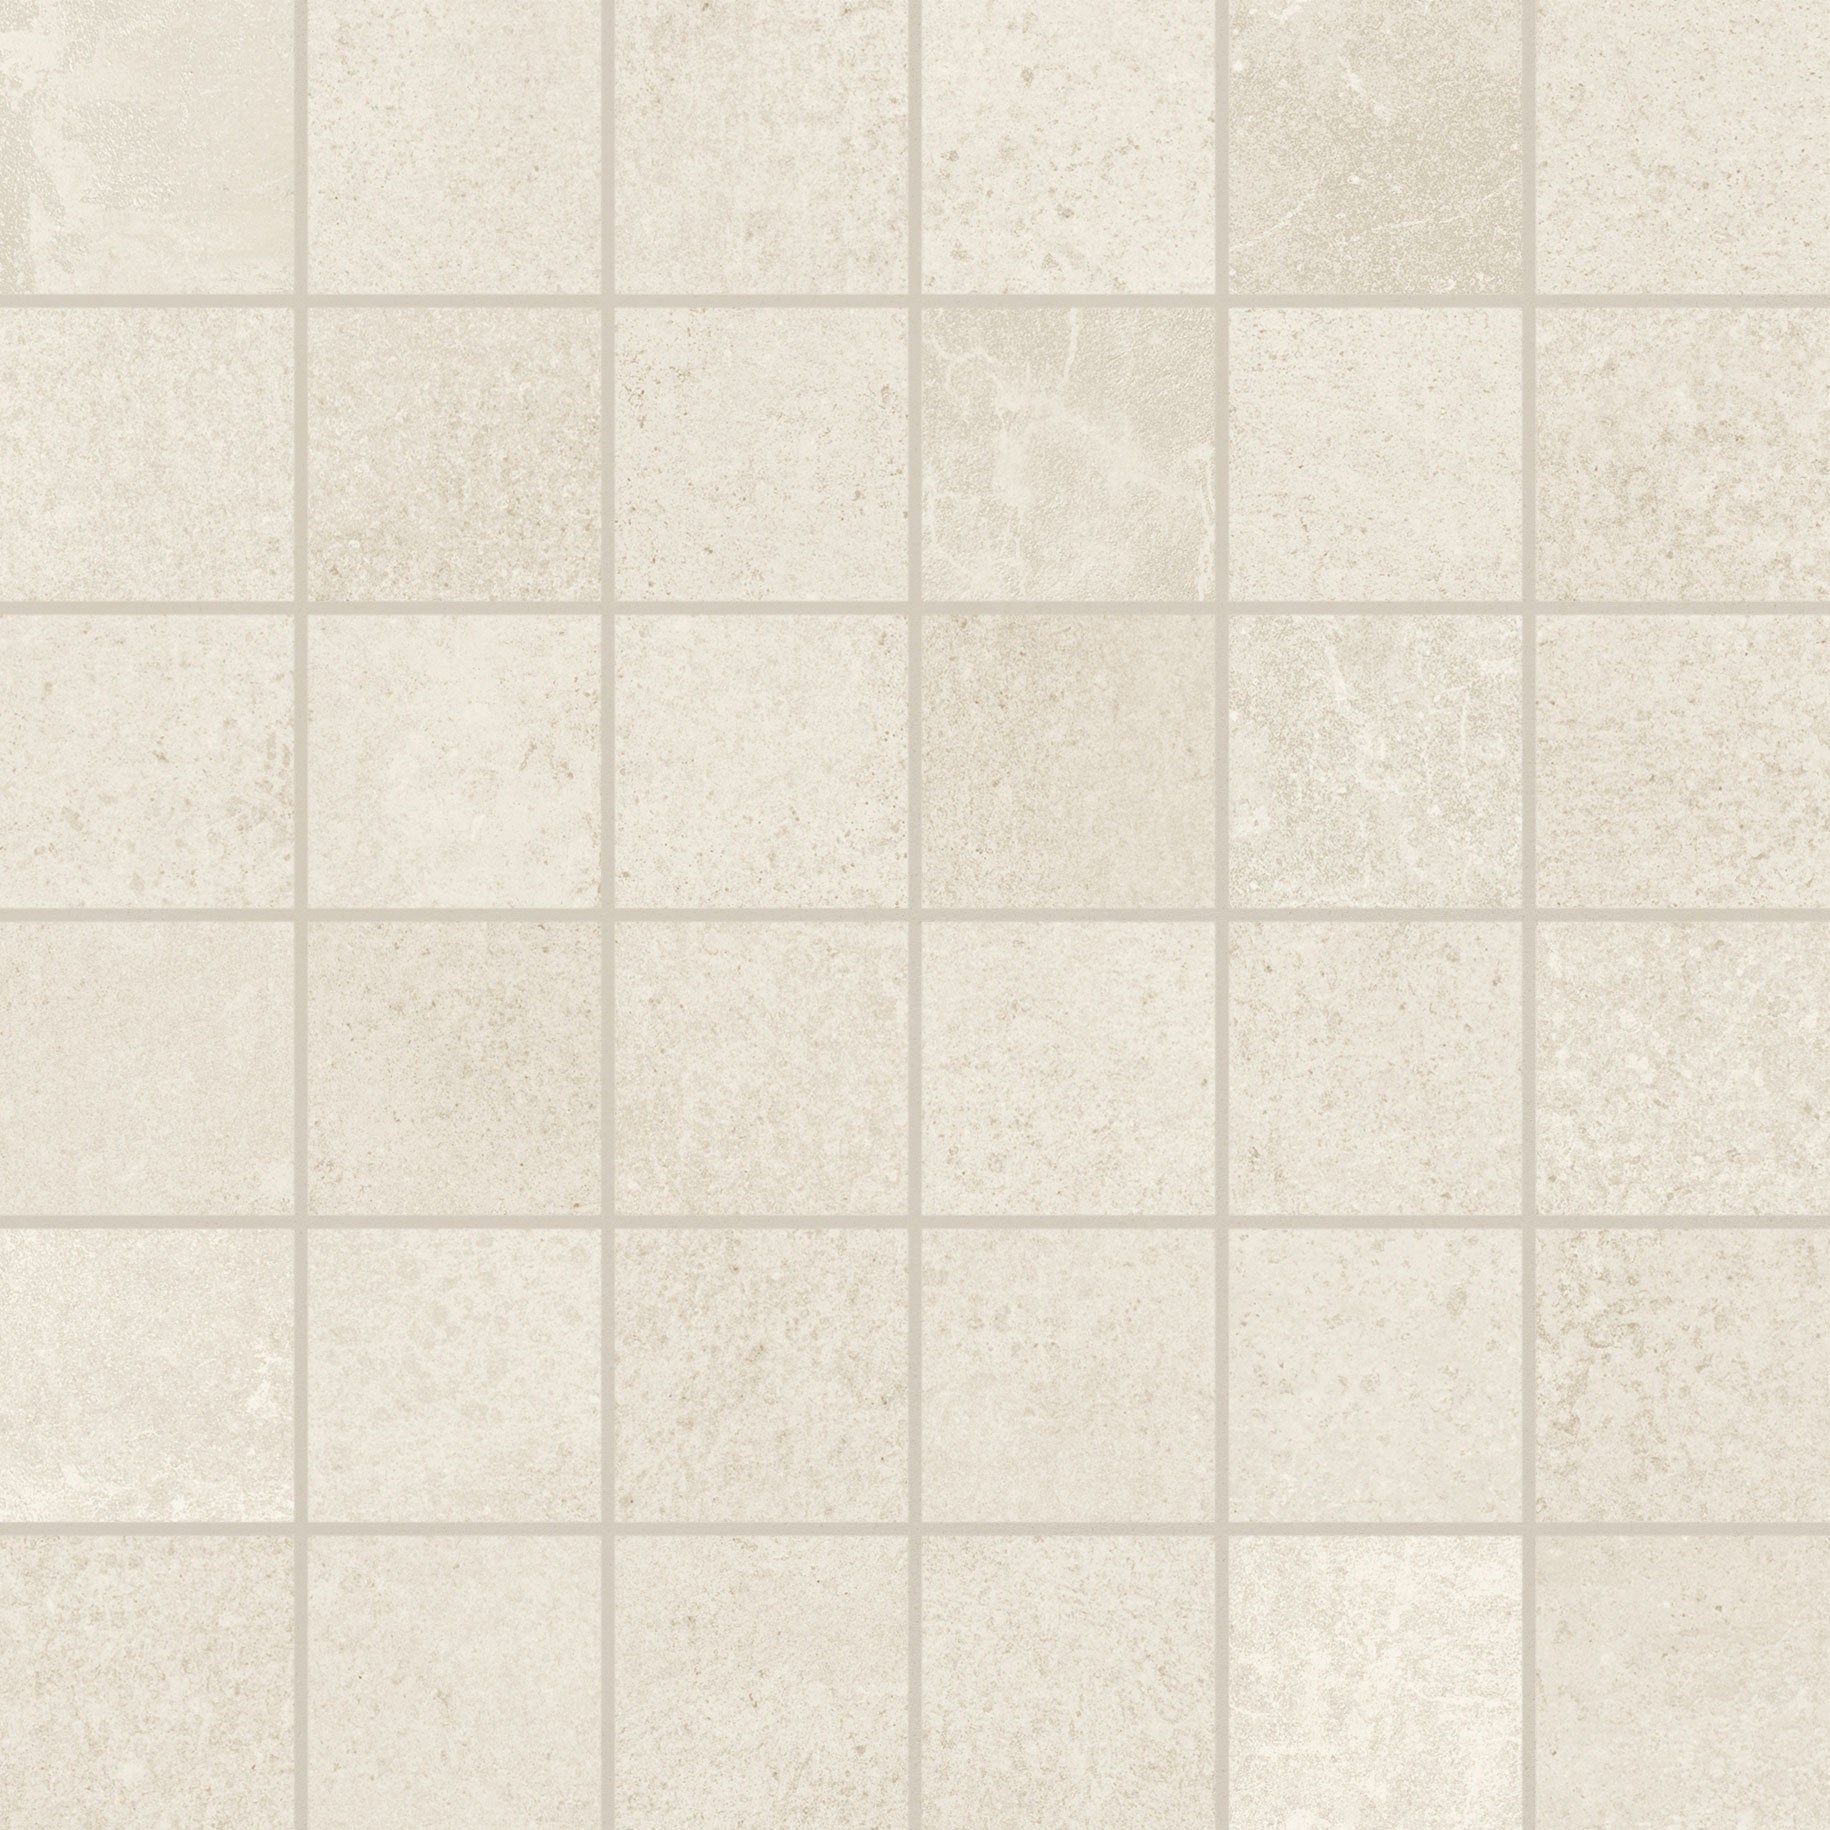 landmark 9mm madein freedom white straight stack 2x2 mosaic 12x12x9mm matte rectified porcelain tile distributed by surface group international